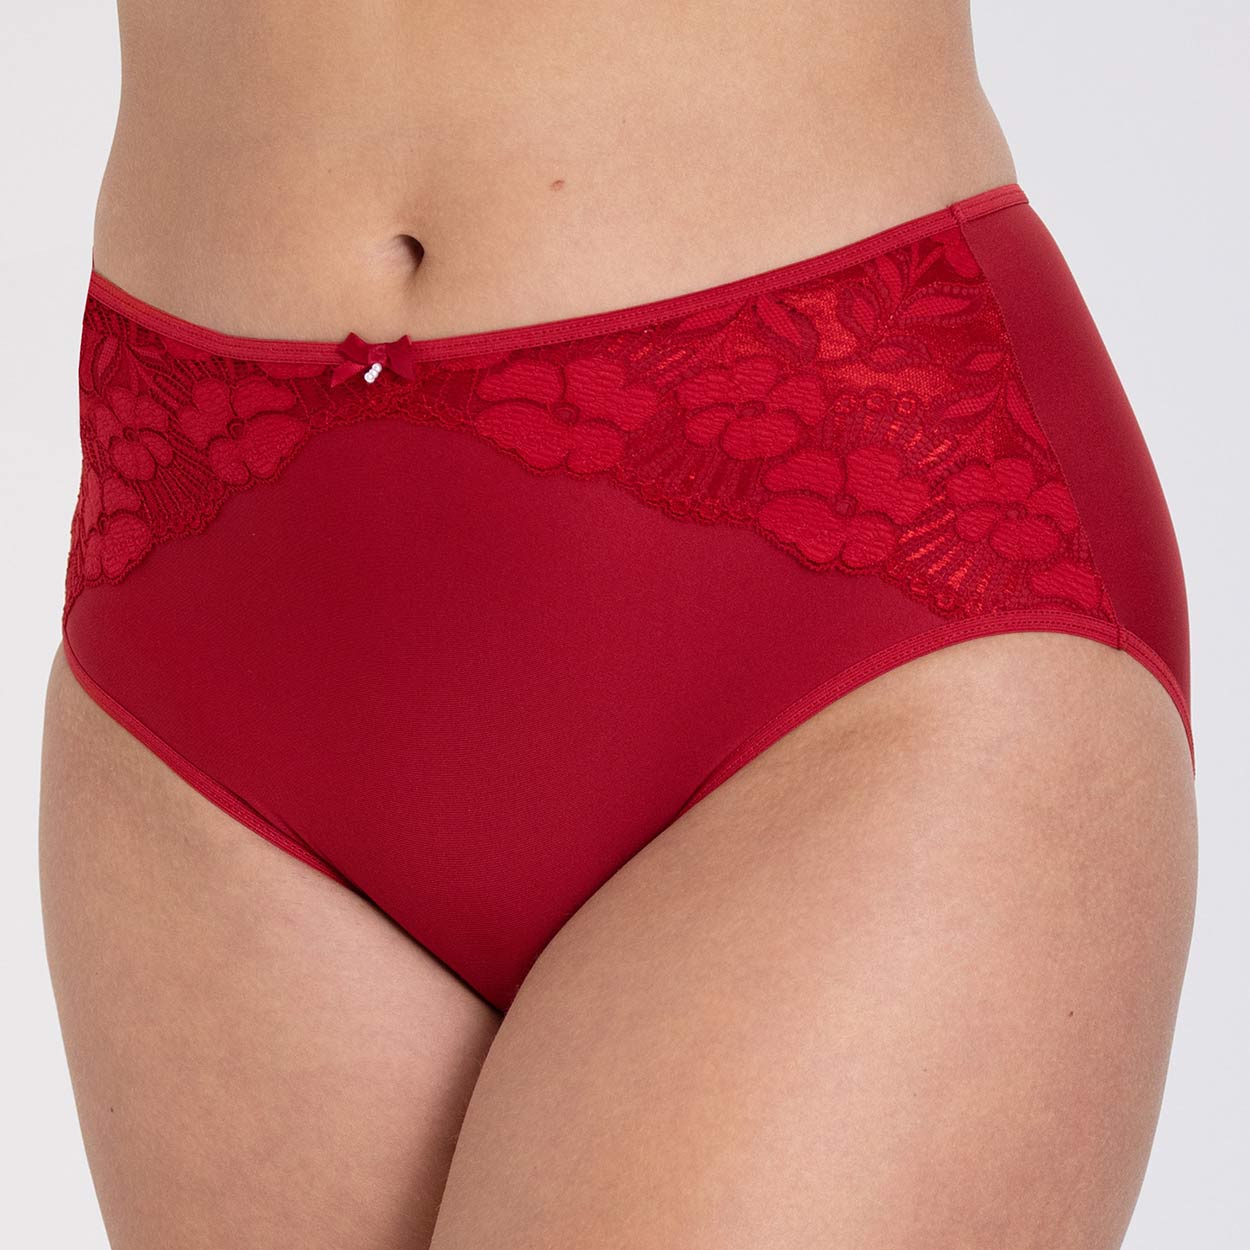 Miss Mary Maxislip Modell Jacquard & Lace in Farbe Rot